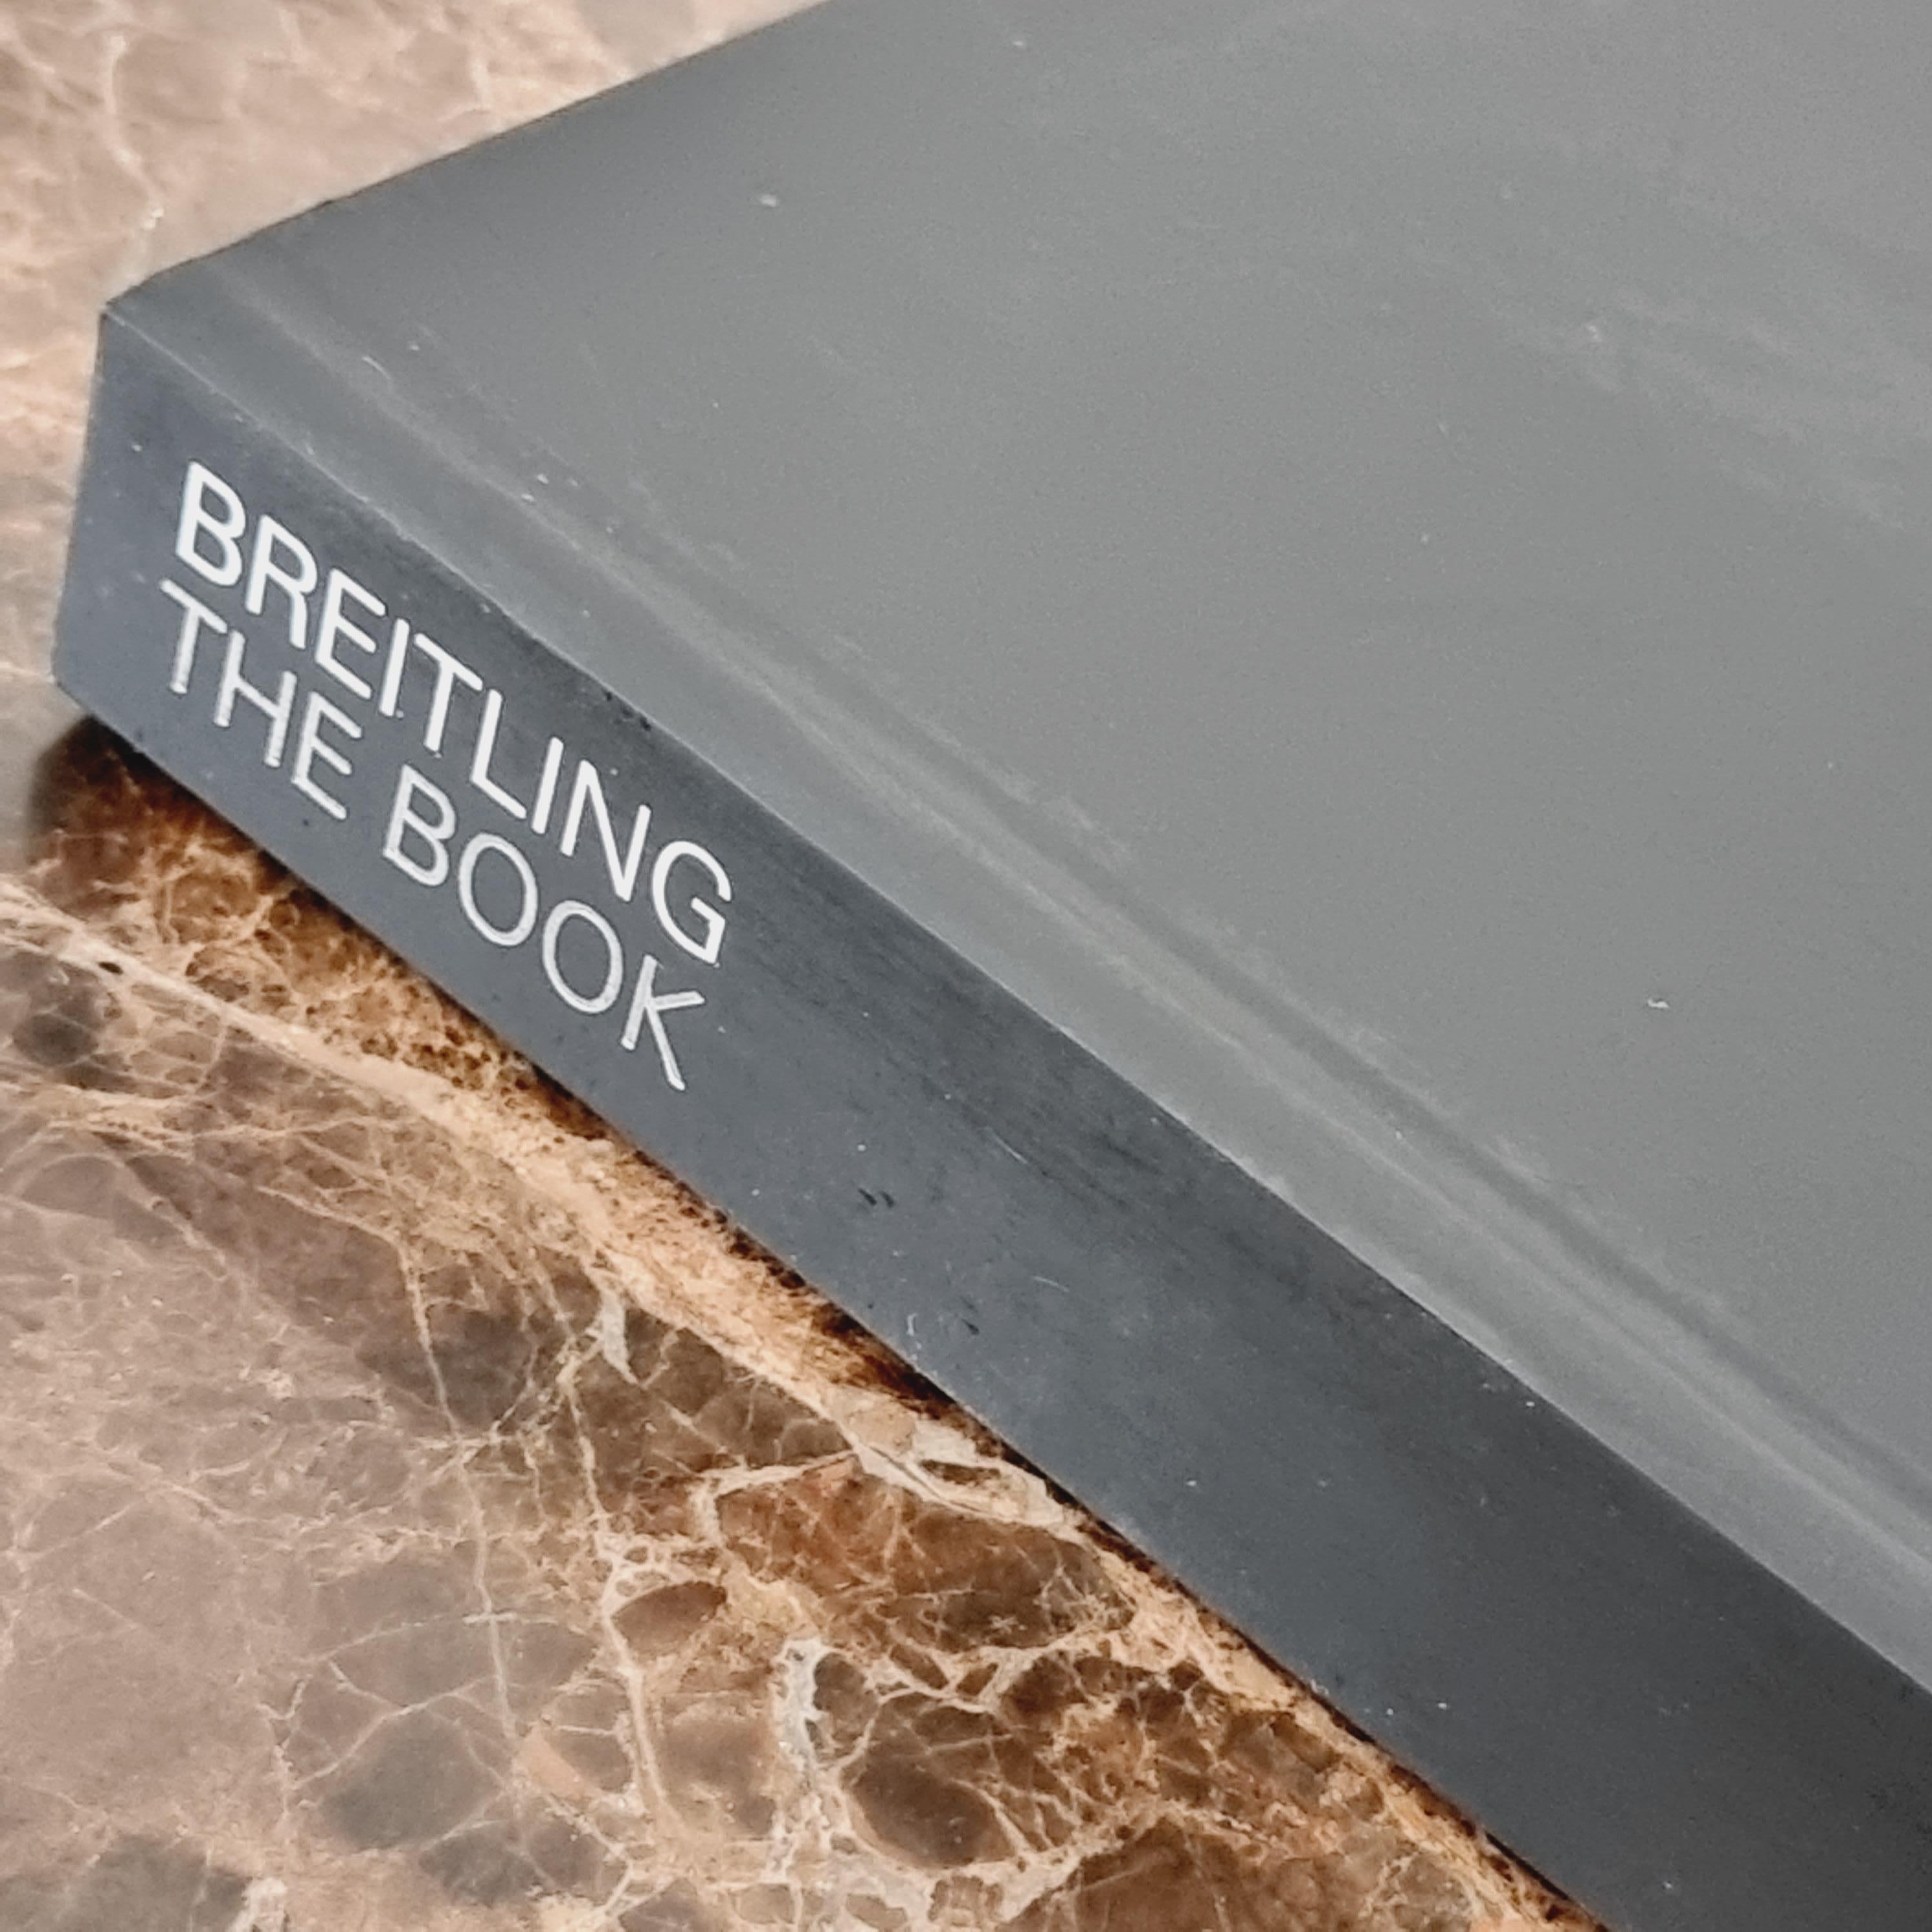 Breitling - The Book, hardcover, English edition, 2009. 336 pages with ca 450 images. By Genoud, Herve. Printed in Switzerland. 

A specialist in chronographs and technical watches, Breitling has also shared the finest hours in the conquest of the